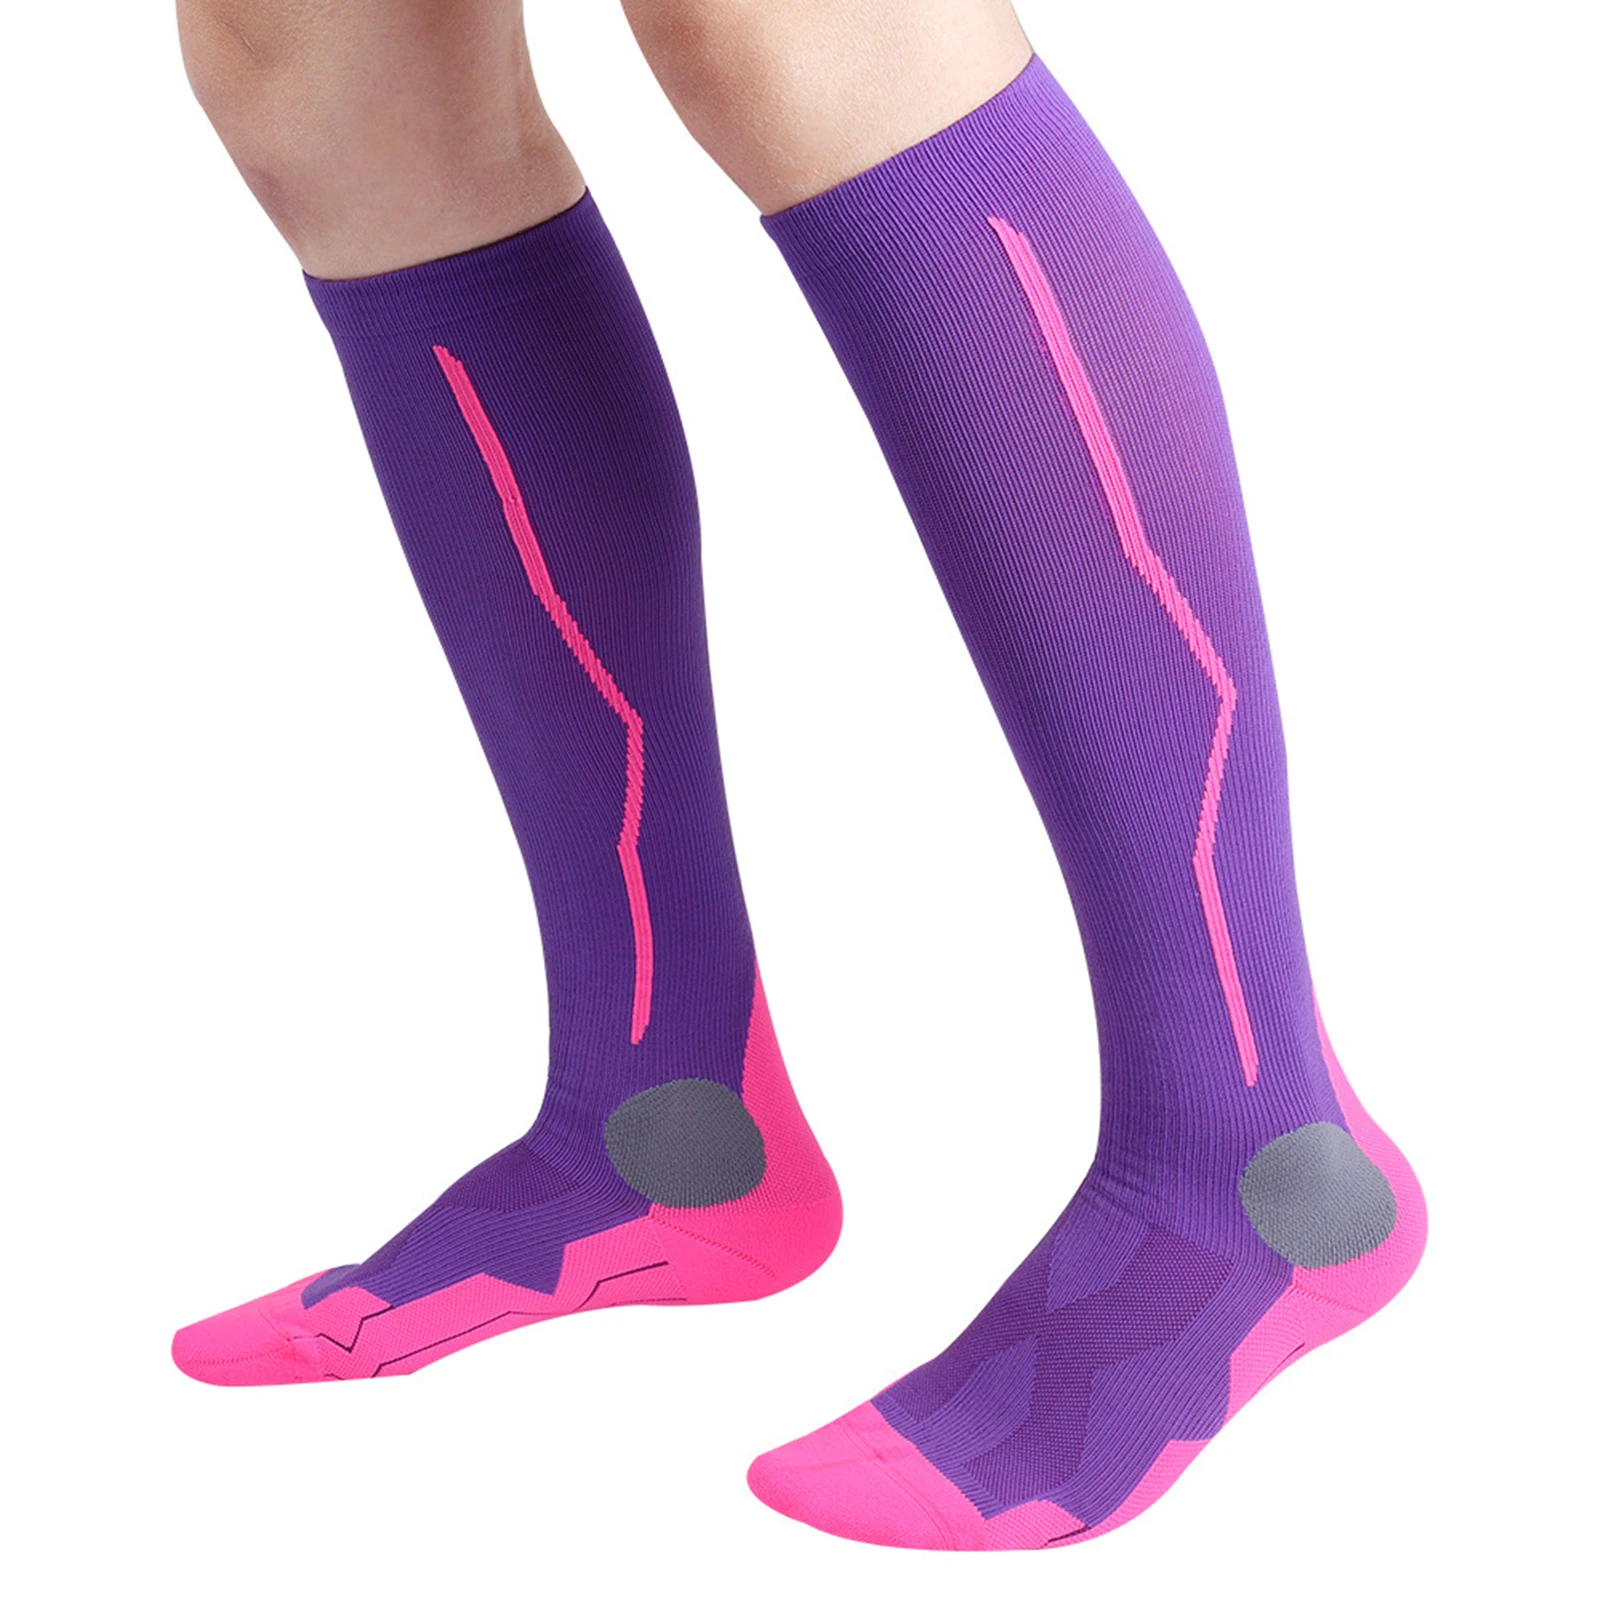 

Hot Selling Calf Shaping Compression Socks with Increasing Pressure Design Elastic Sports Support Stockings for Women Men